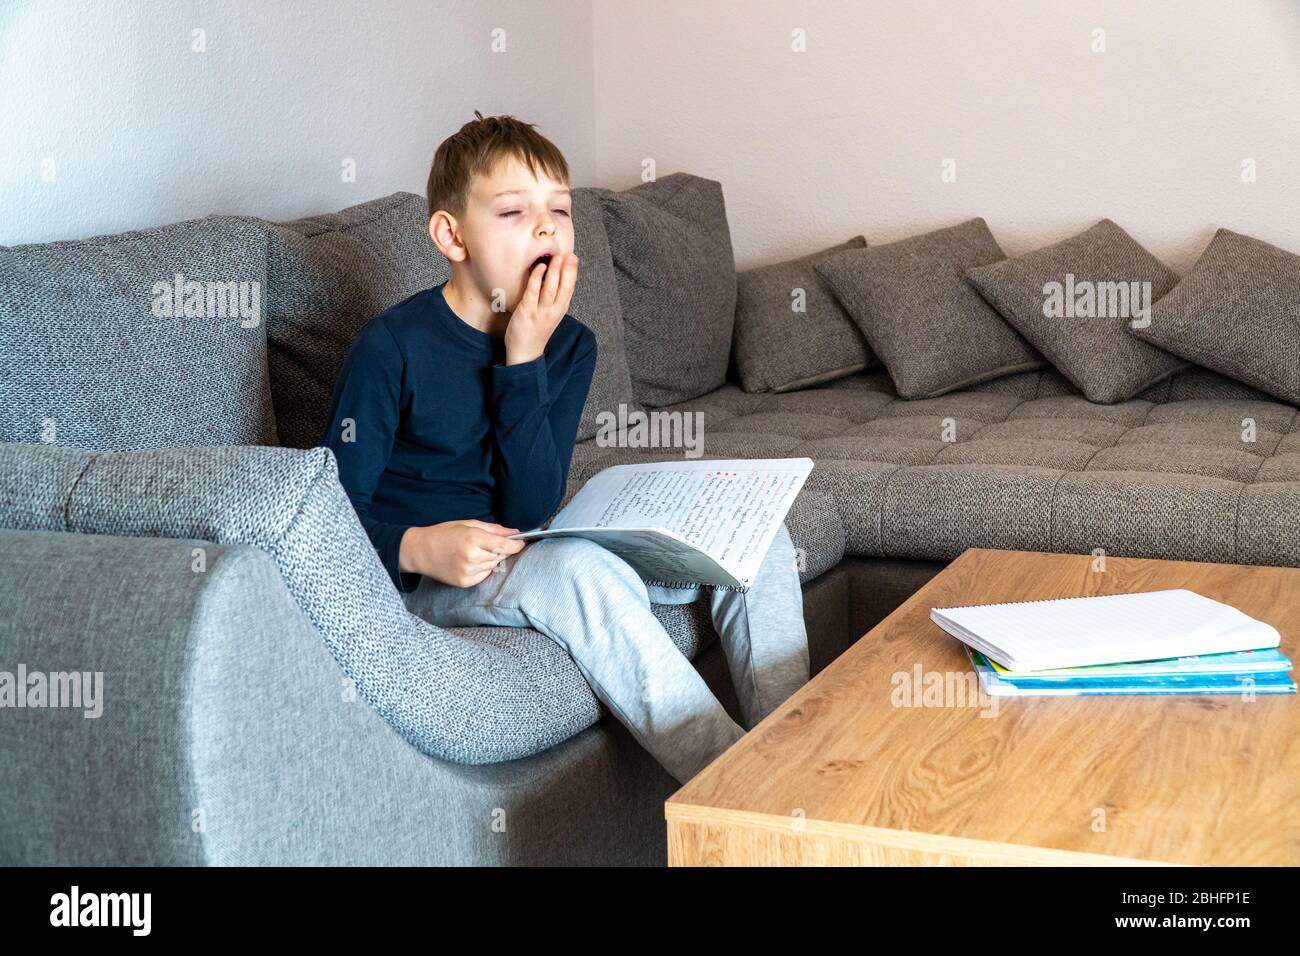 A yawning boy is bored studying at home. Self-study at home Stock Photo